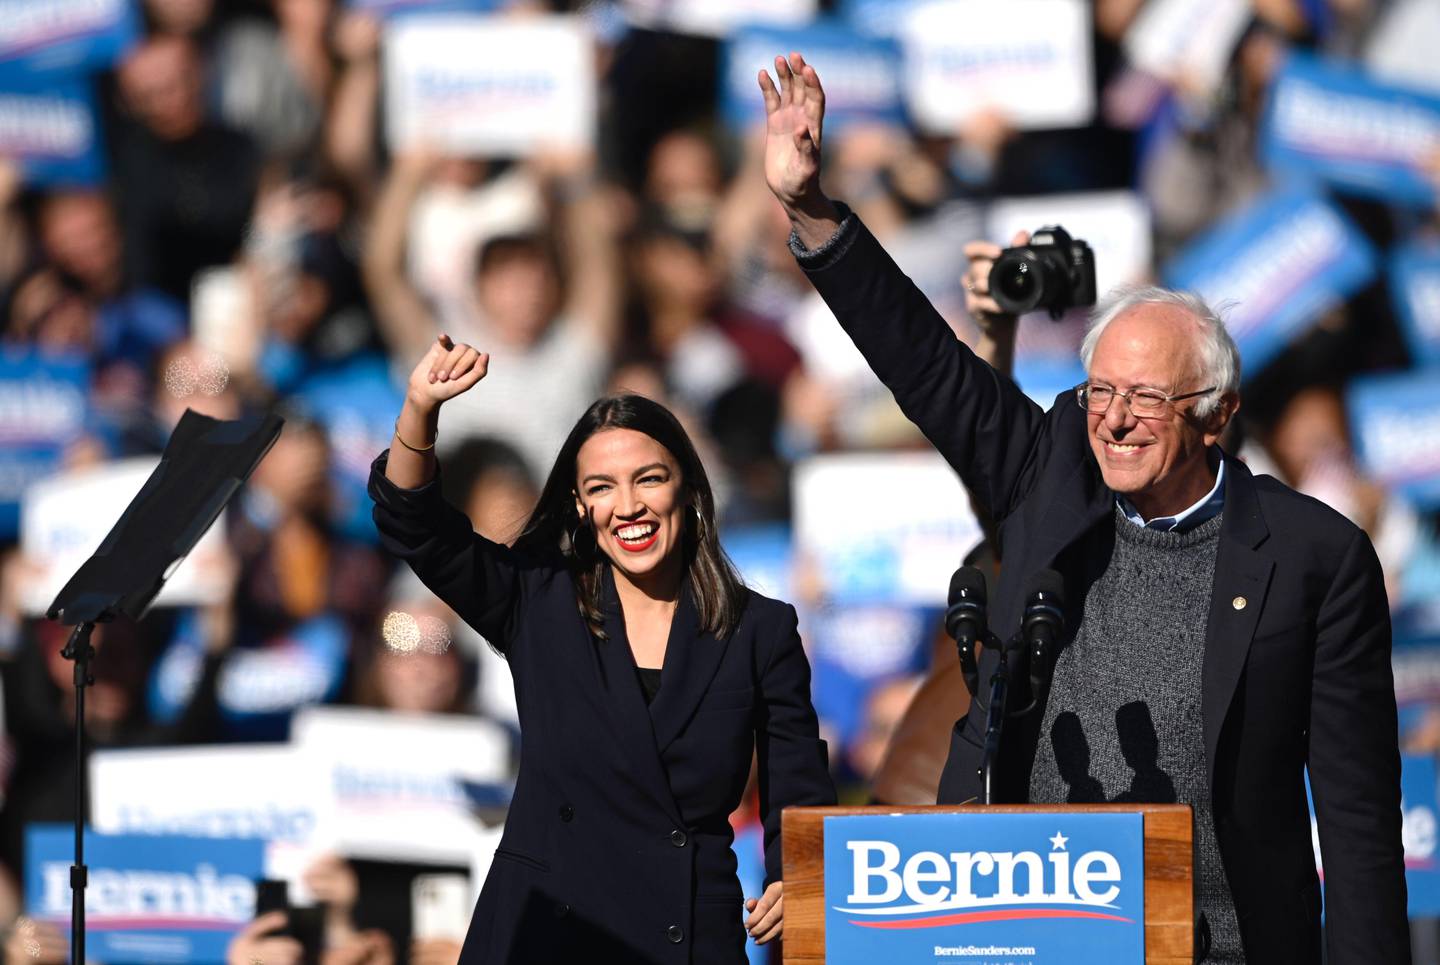 (FILES) In this file photo taken on October 19, 2019, 2020 Democratic presidential hopeful US Senator Bernie Sanders (D-VT) and representative Alexandria Ocasio-Cortez (D-NY) wave to a crowd of supporters during a campaign rally in New York City. - During Biden's campaign, Democratic socialists like Ocasio-Cortez and Vermont's Senator Bernie Sanders -- the runner-up in the 2016 and 2020 primaries -- buried the hatchet with the party's moderates and helped get out the vote. But as the dust settles it is clear that the tensions that arose during the primary over healthcare, student debt and combating climate change and inequality haven't gone anywhere. (Photo by Johannes EISELE / AFP)